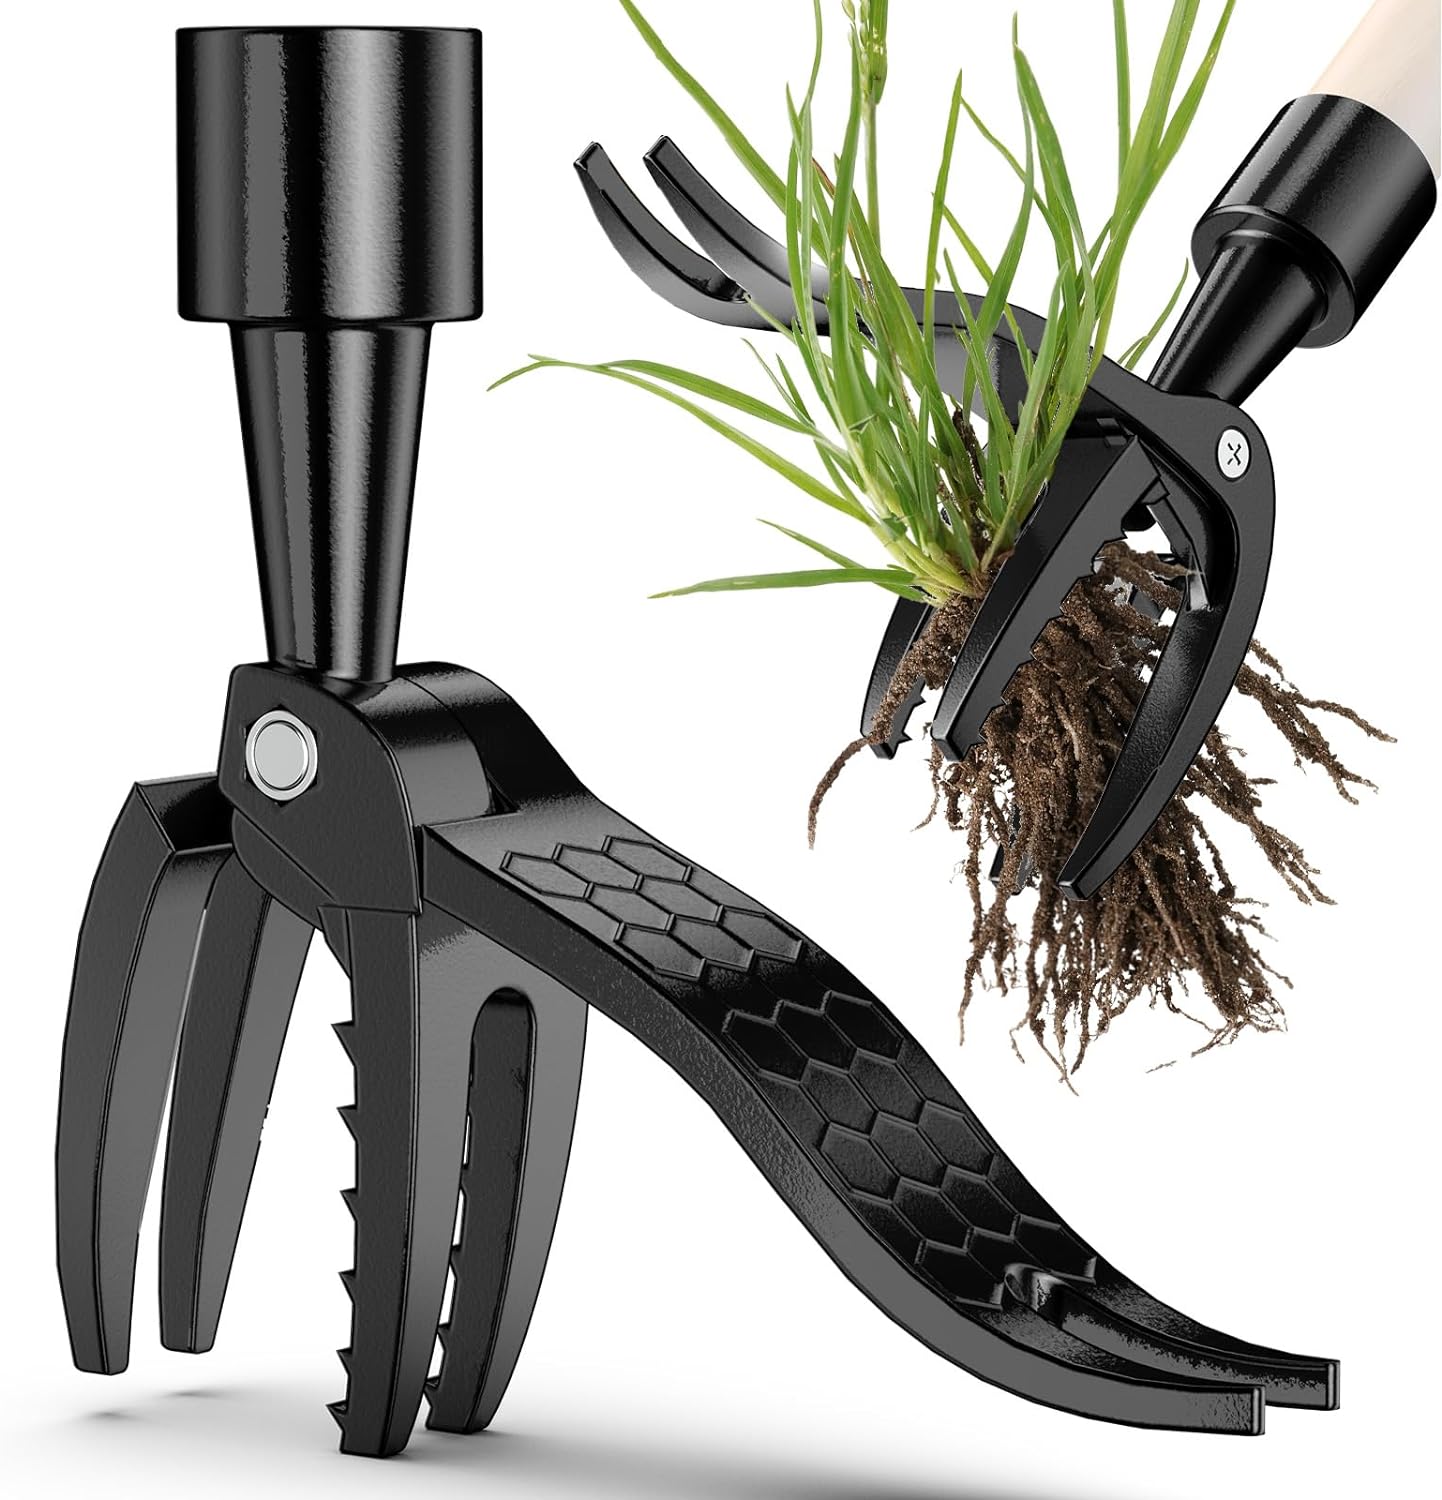 Stand Up Weed Puller Tool hookupcart